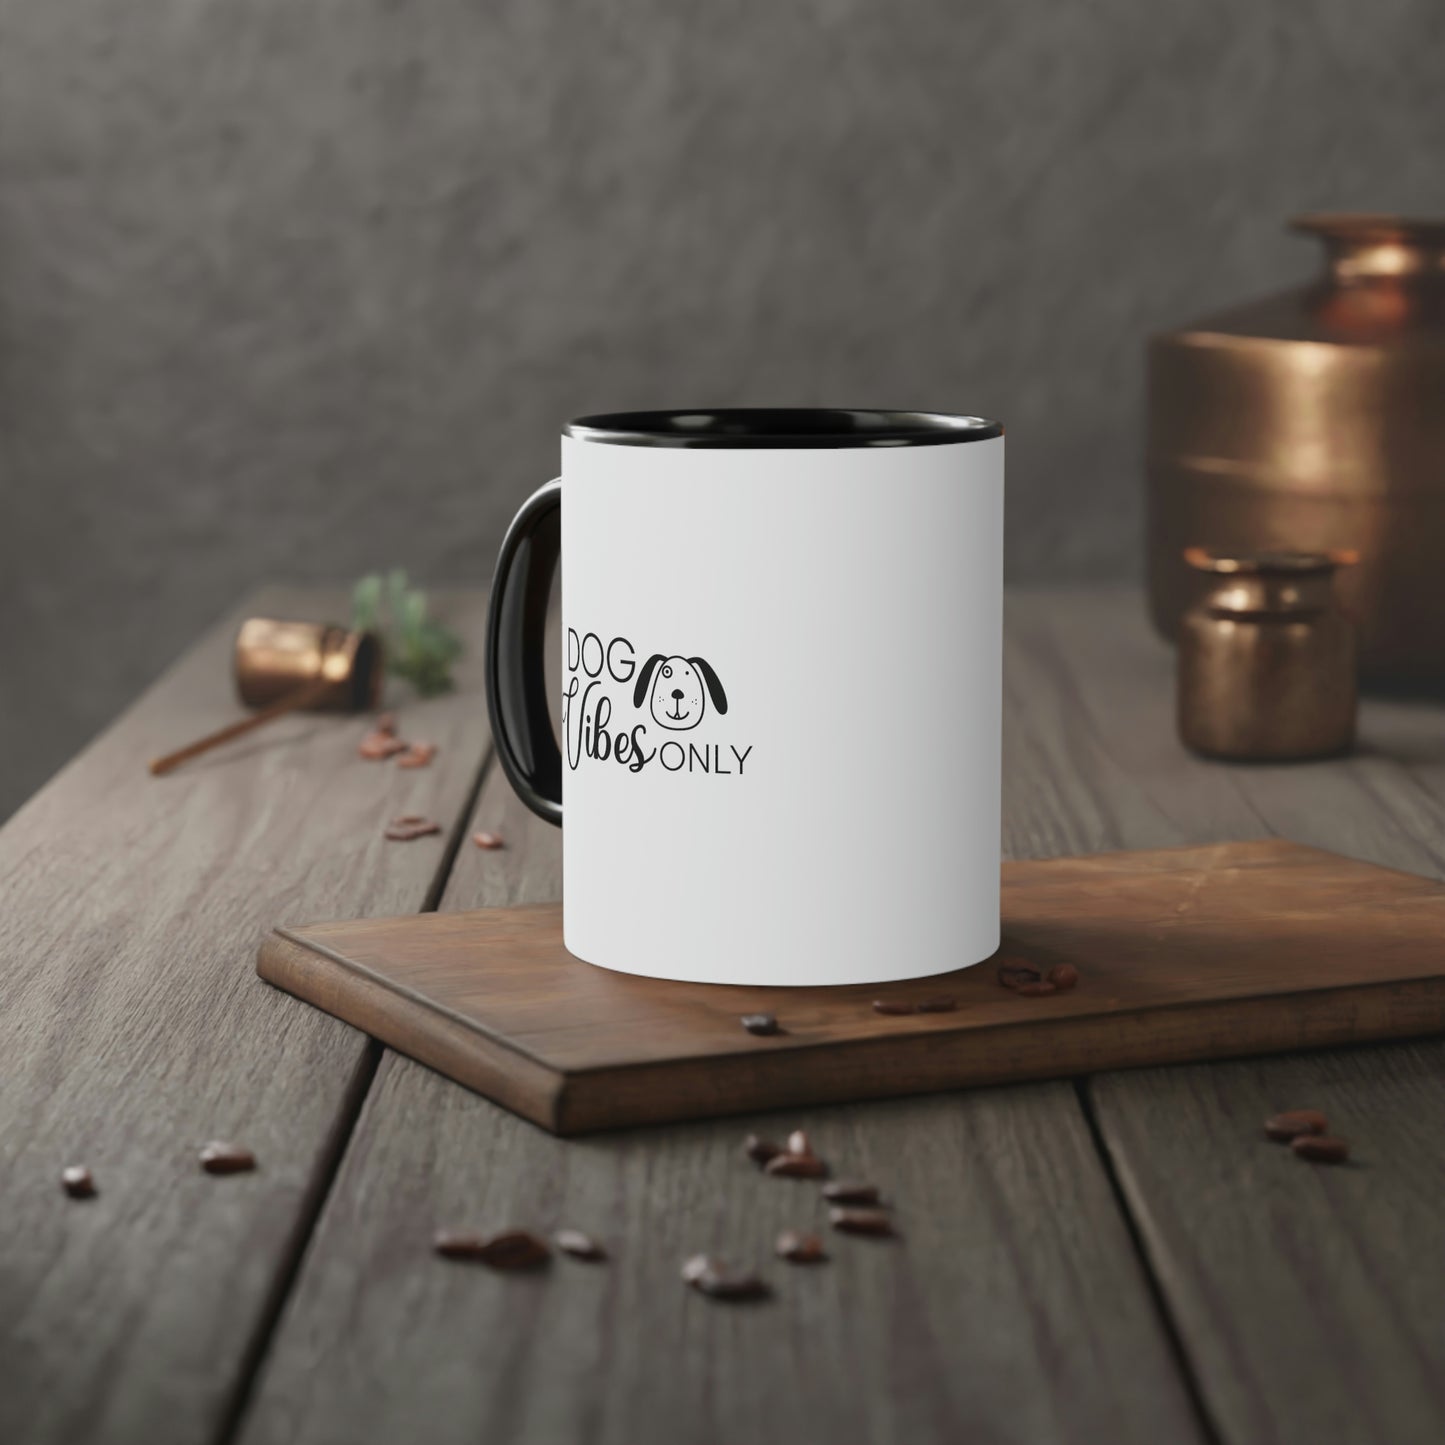 Dog Vibes Only Black and White Accent Mug, 11oz